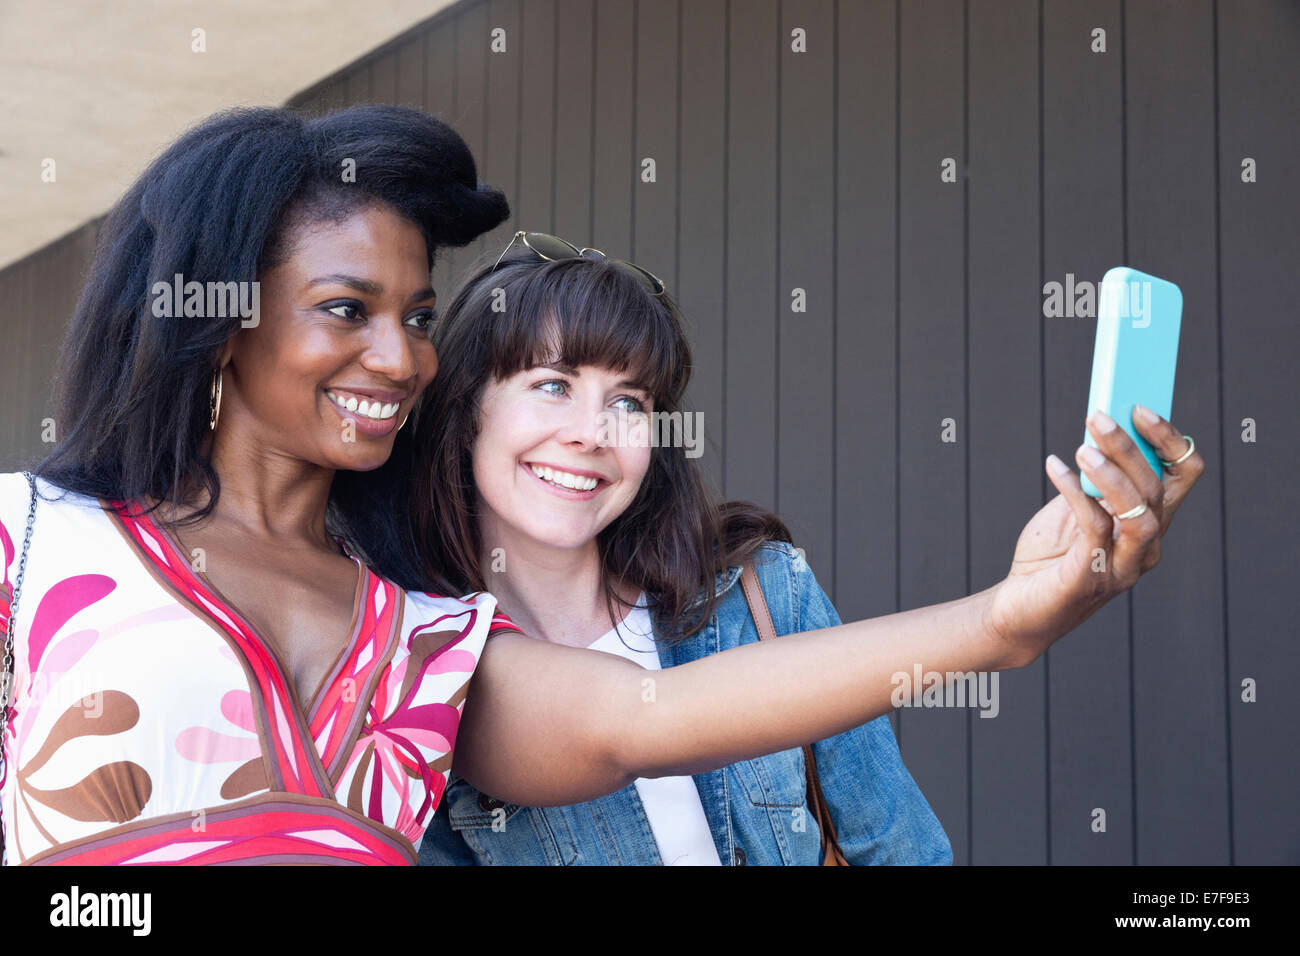 Women taking cell phone picture together outdoors Stock Photo